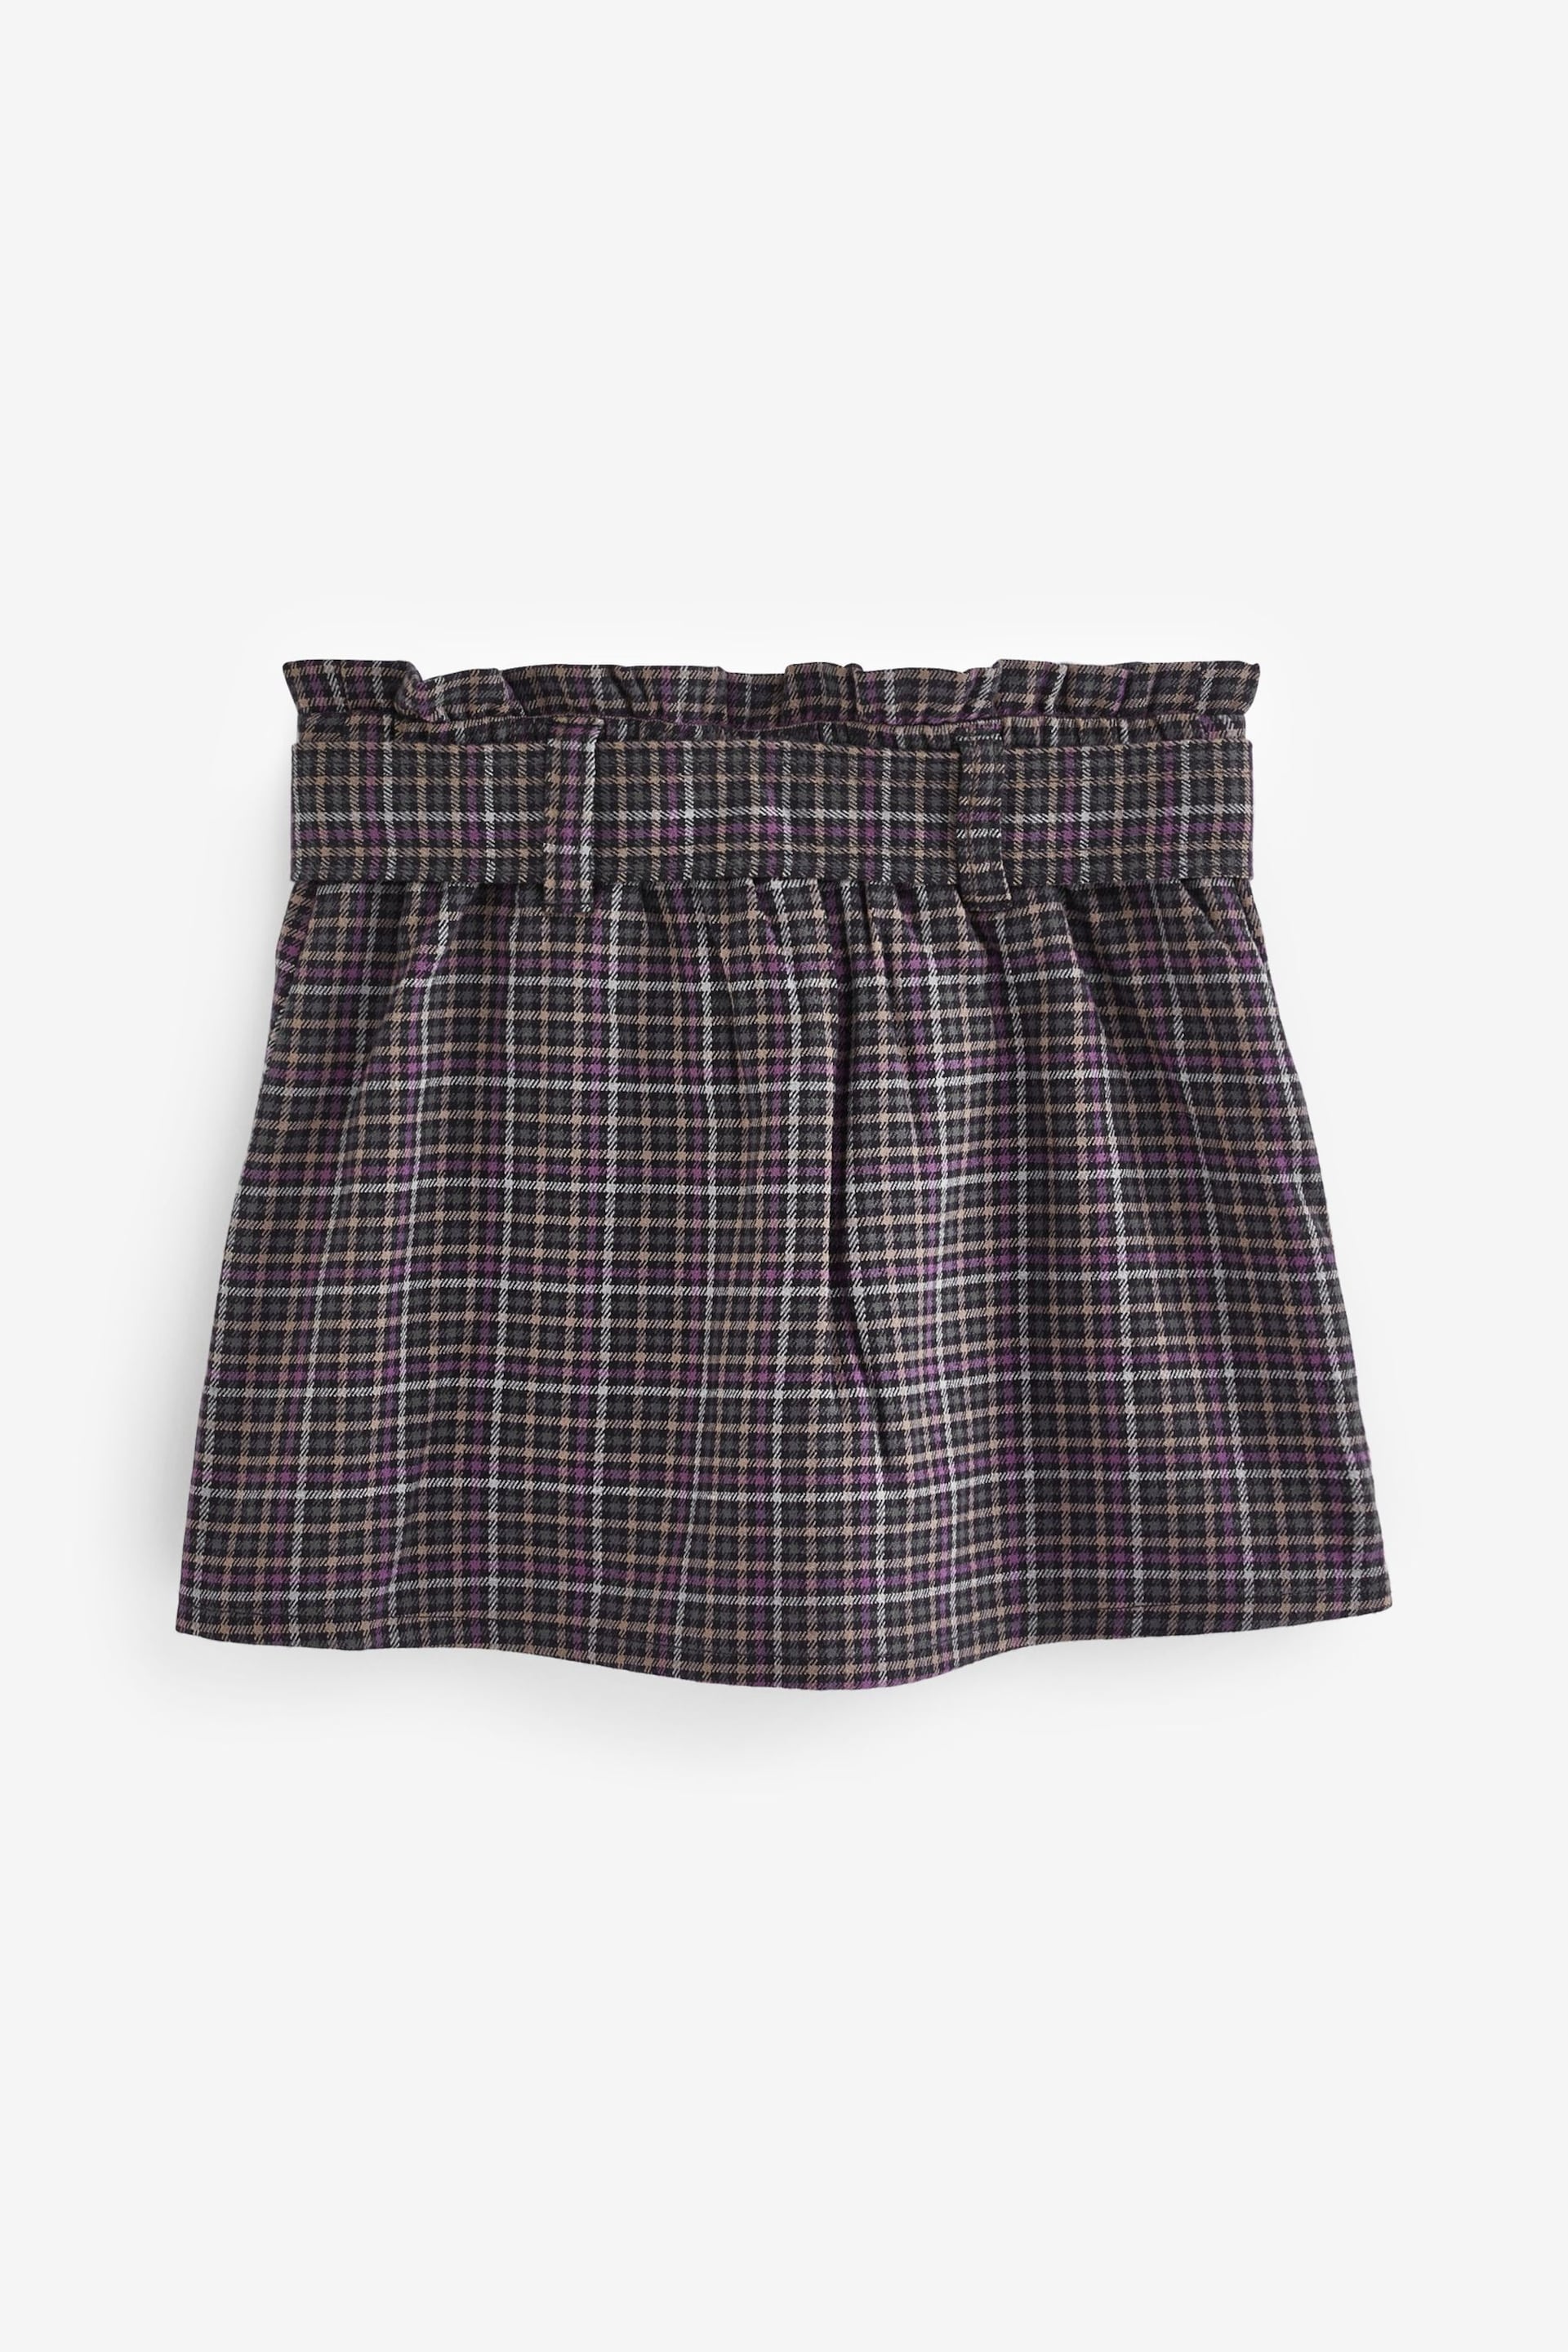 Abercrombie & Fitch Grey Checked Belted Mini Short Skirt - Image 4 of 6